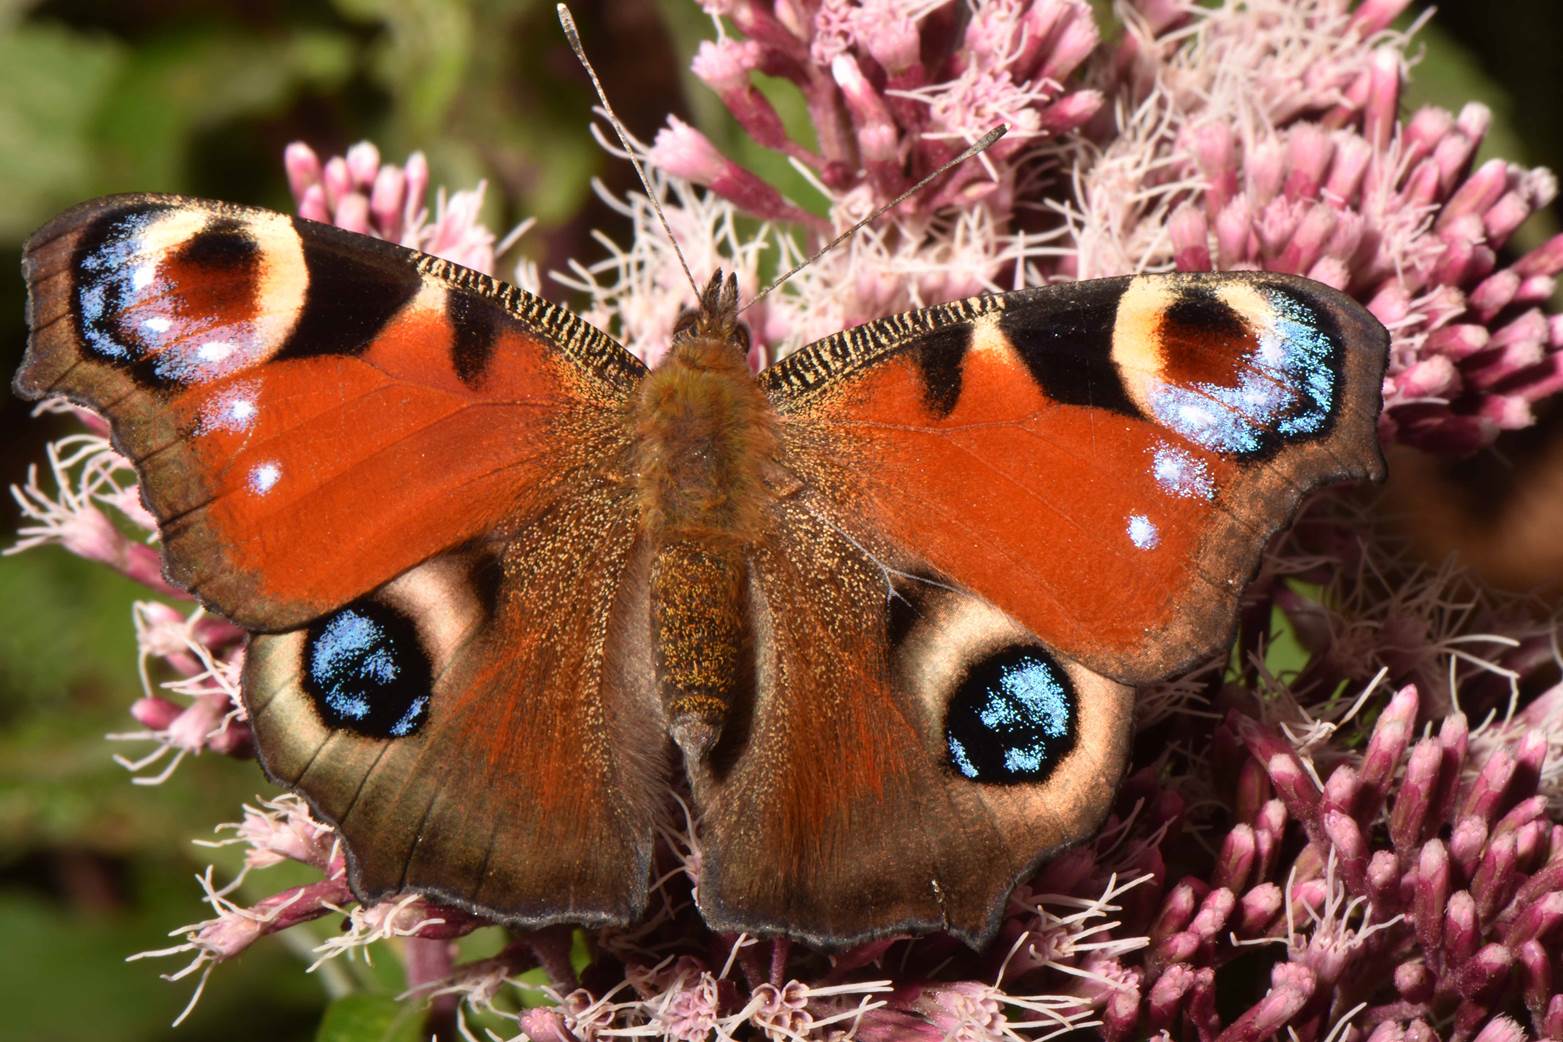 A butterfly on a flower

Description automatically generated with medium confidence